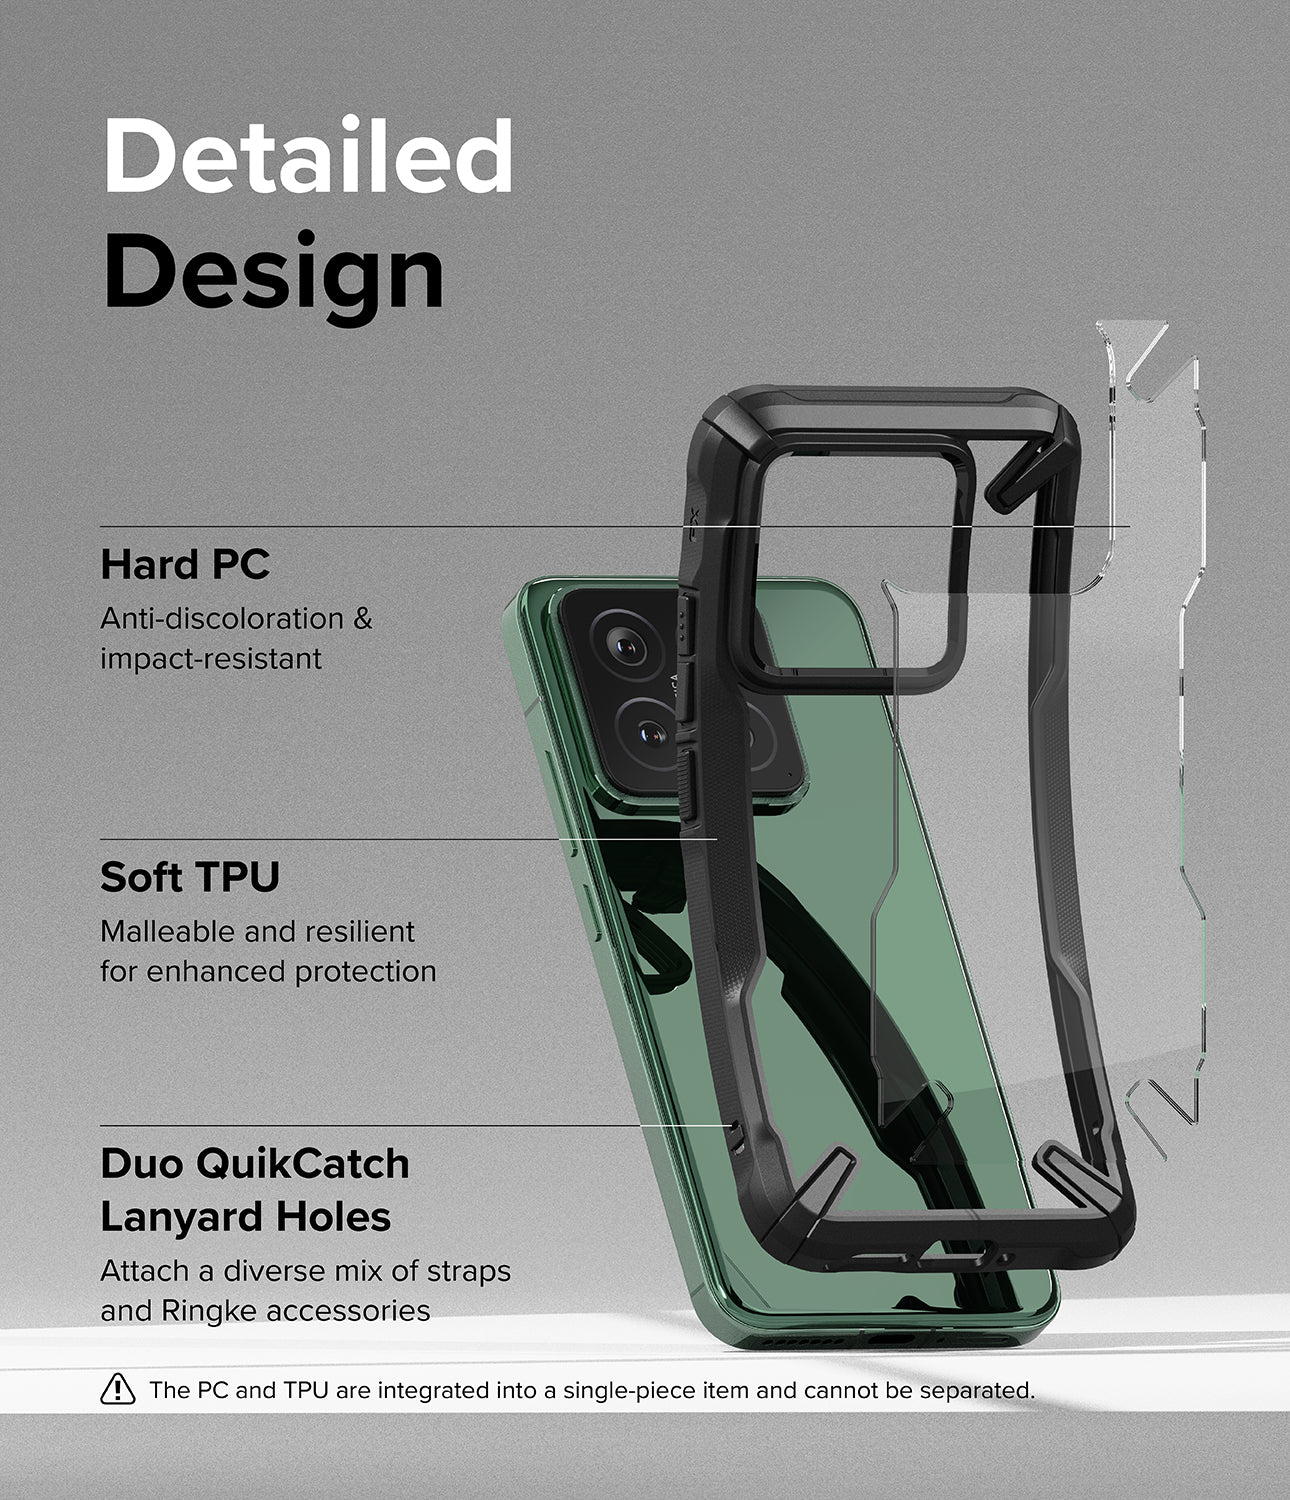 Xiaomi 14 Case | Fusion-X - Black - Detailed Design. Anti-discoloration and impact resistant with Hard PC. Malleable and resilient for enhanced protection with Soft TPU. Attach a diverse mix of straps and Ringke accessories with Duo QuikCatch Lanyard Holes